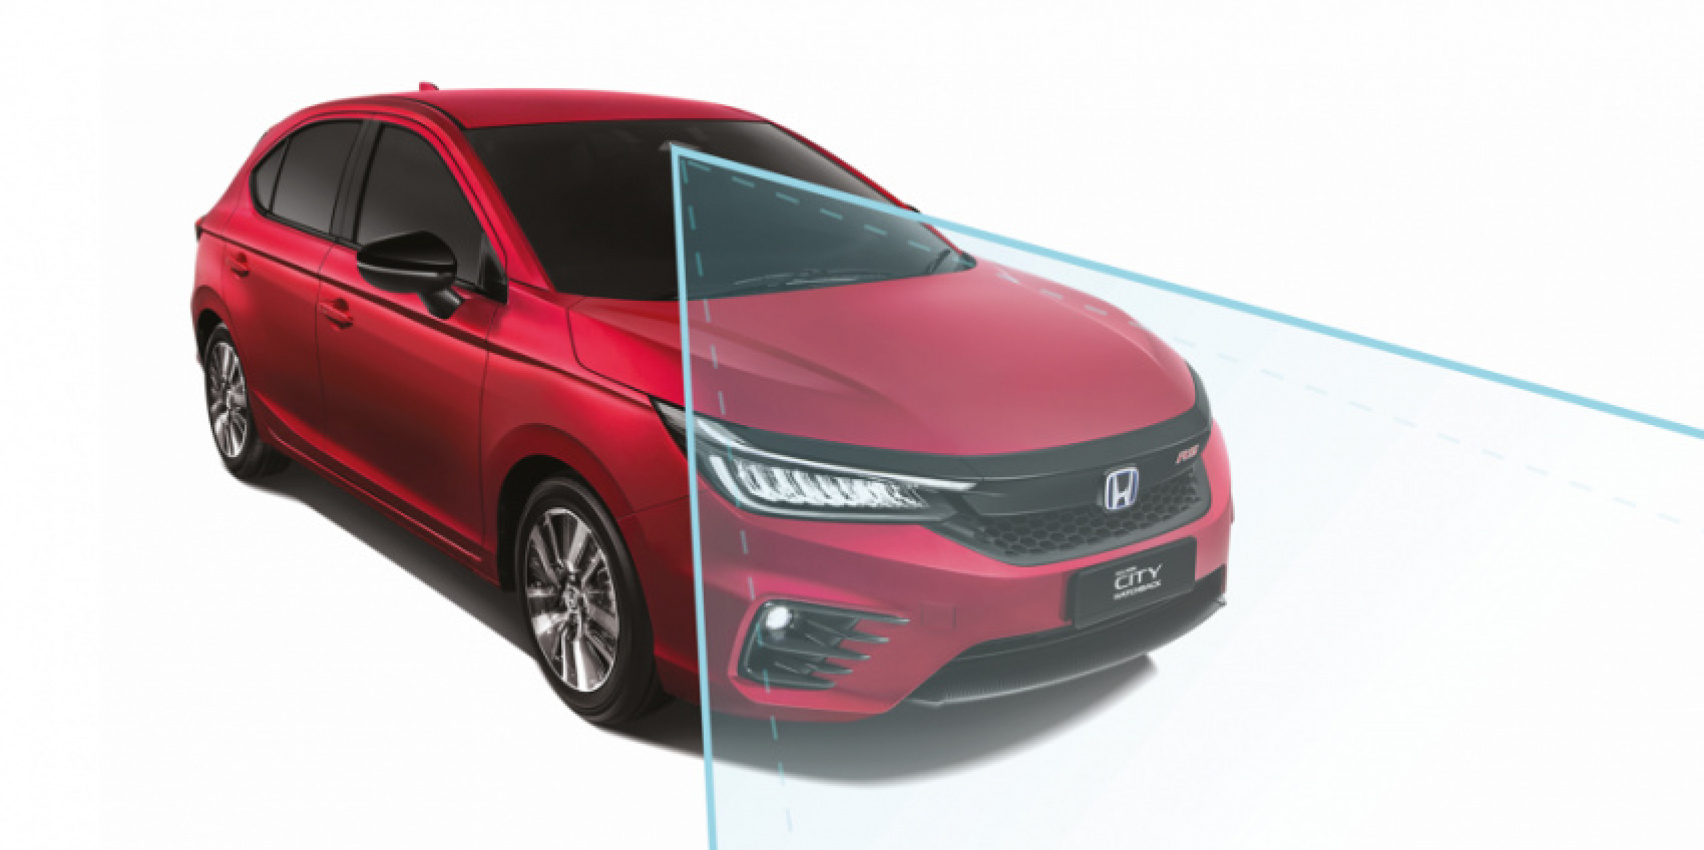 autos, cars, honda, 2022 city hatchback, 2022 honda city hatchback, auto news, honda city, honda city hatchback malaysia, honda city hatchback rs, honda city hatchback v, honda malaysia, the all-new 2022 honda city hatchback is now open for booking!